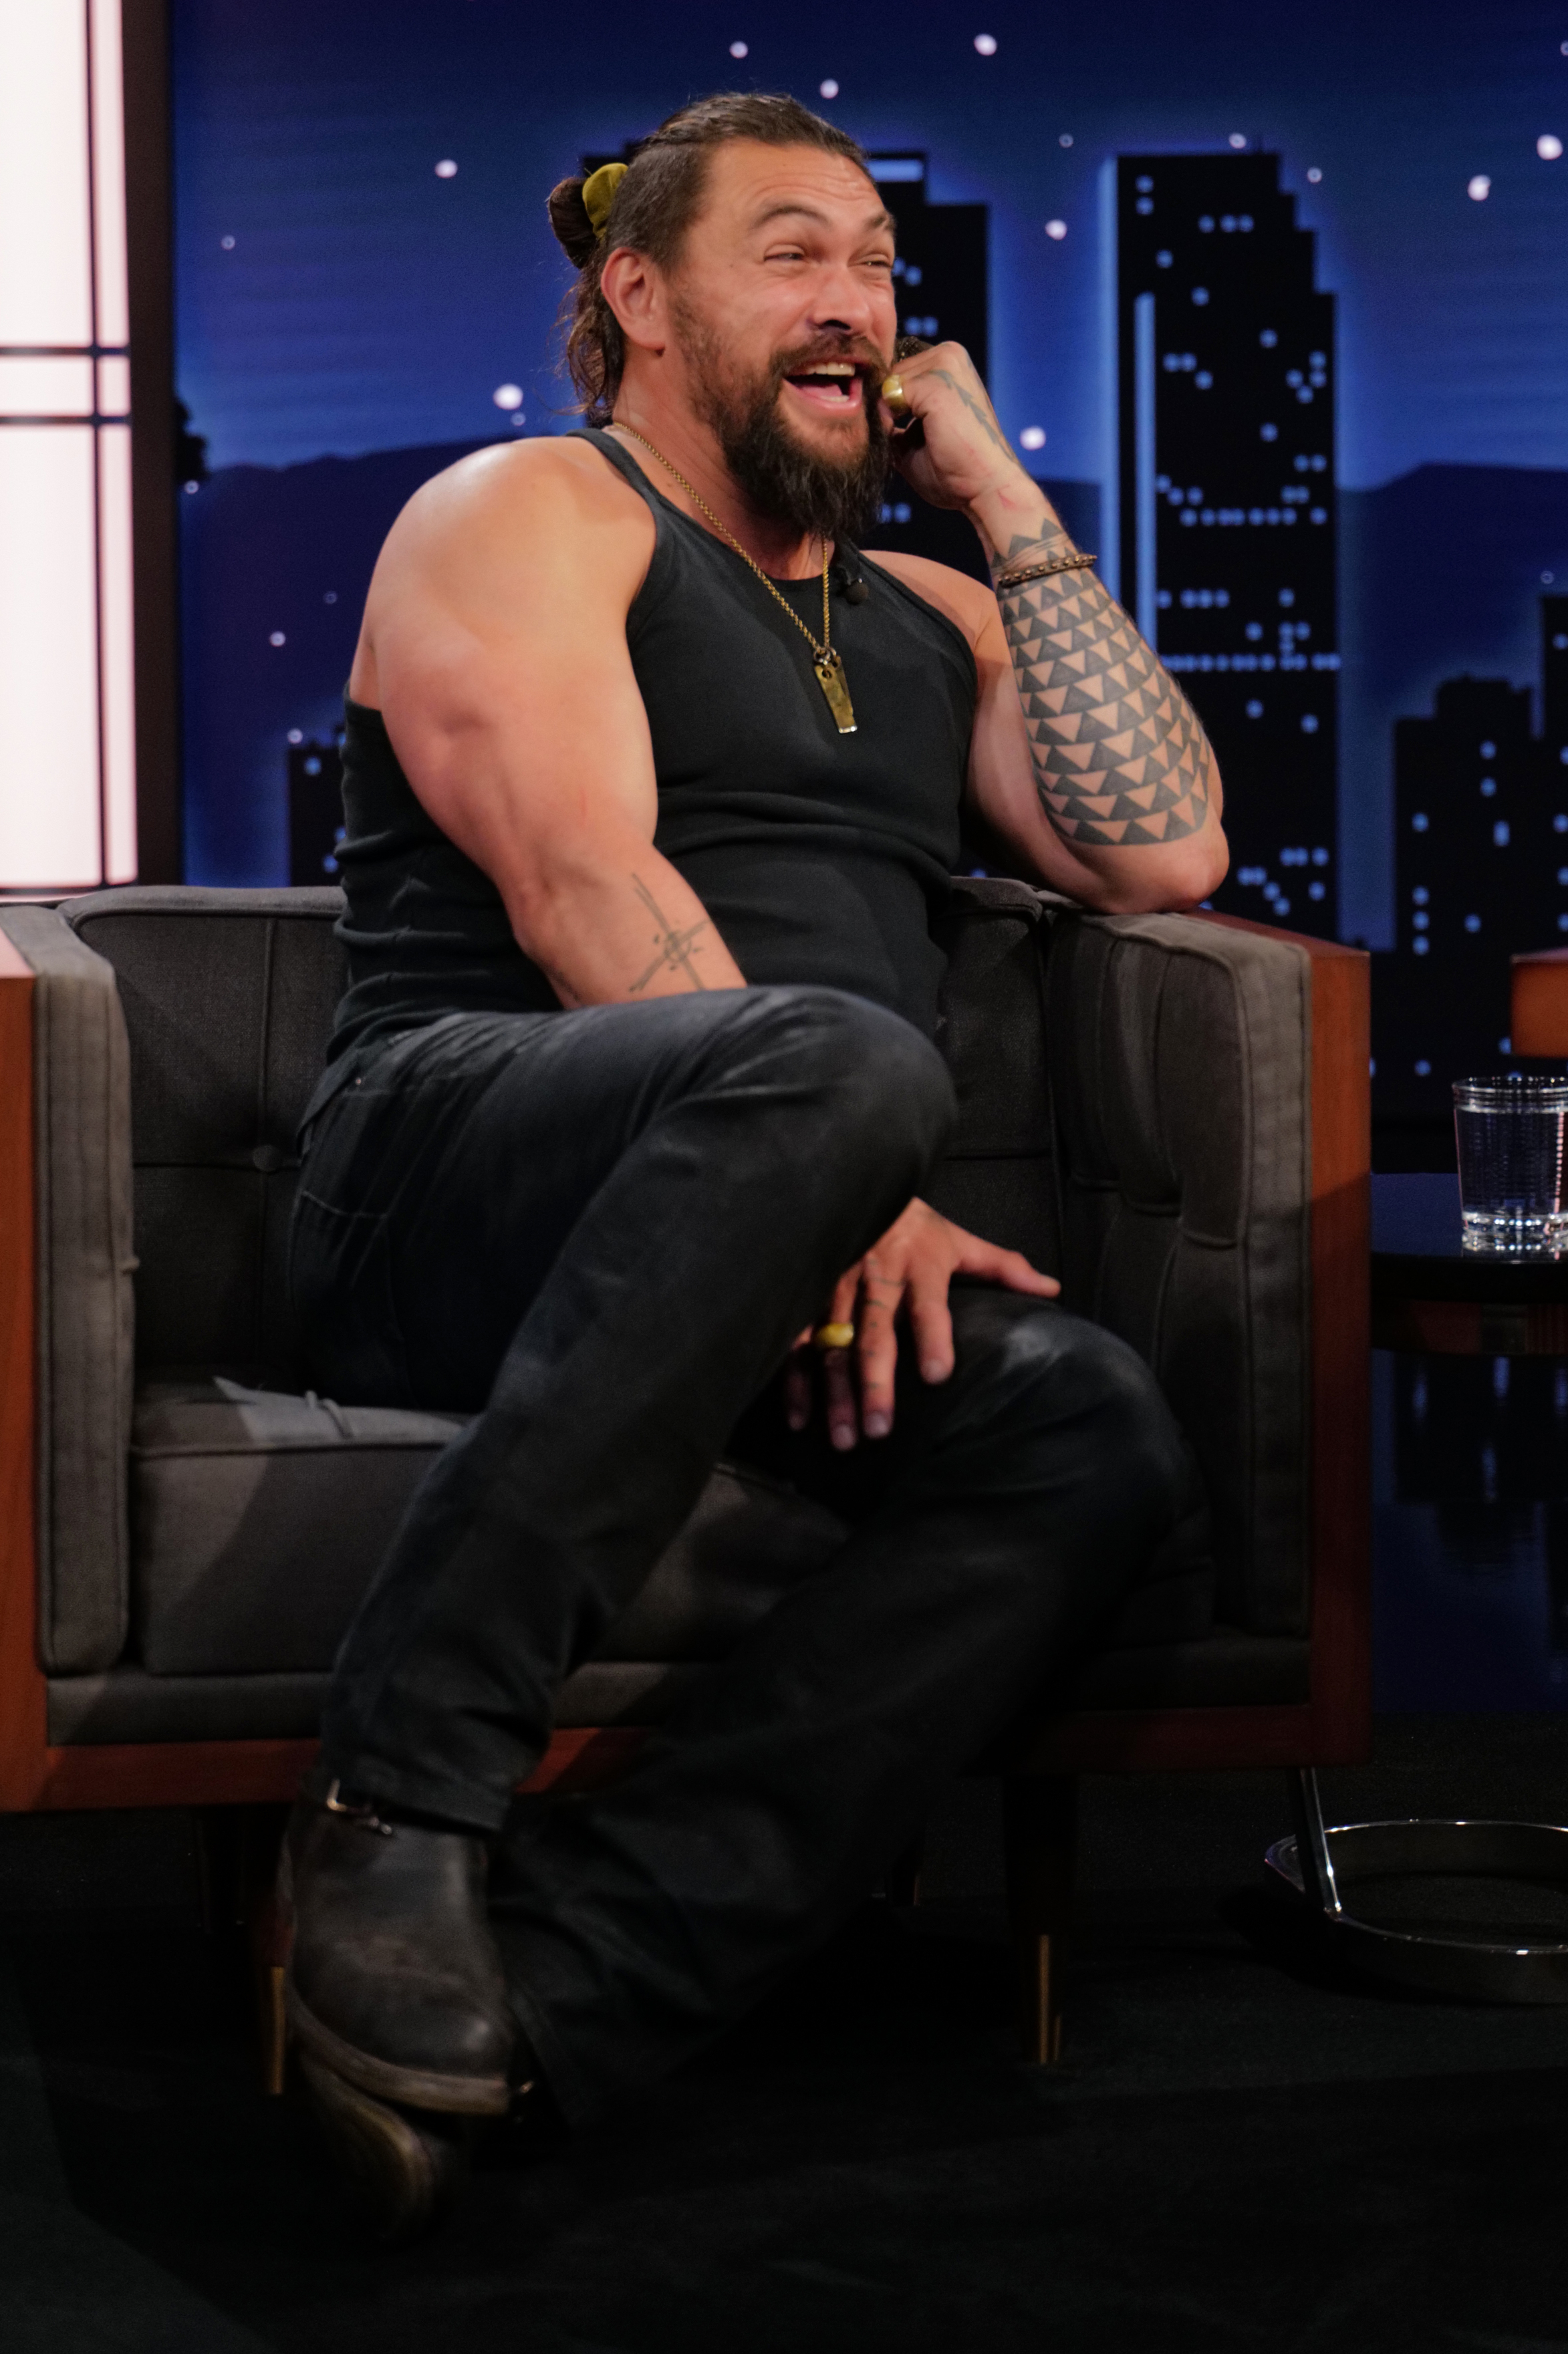 Jason Momoa seated in a talk show setting, wearing a tank top and jeans, laughing with a hand to his ear